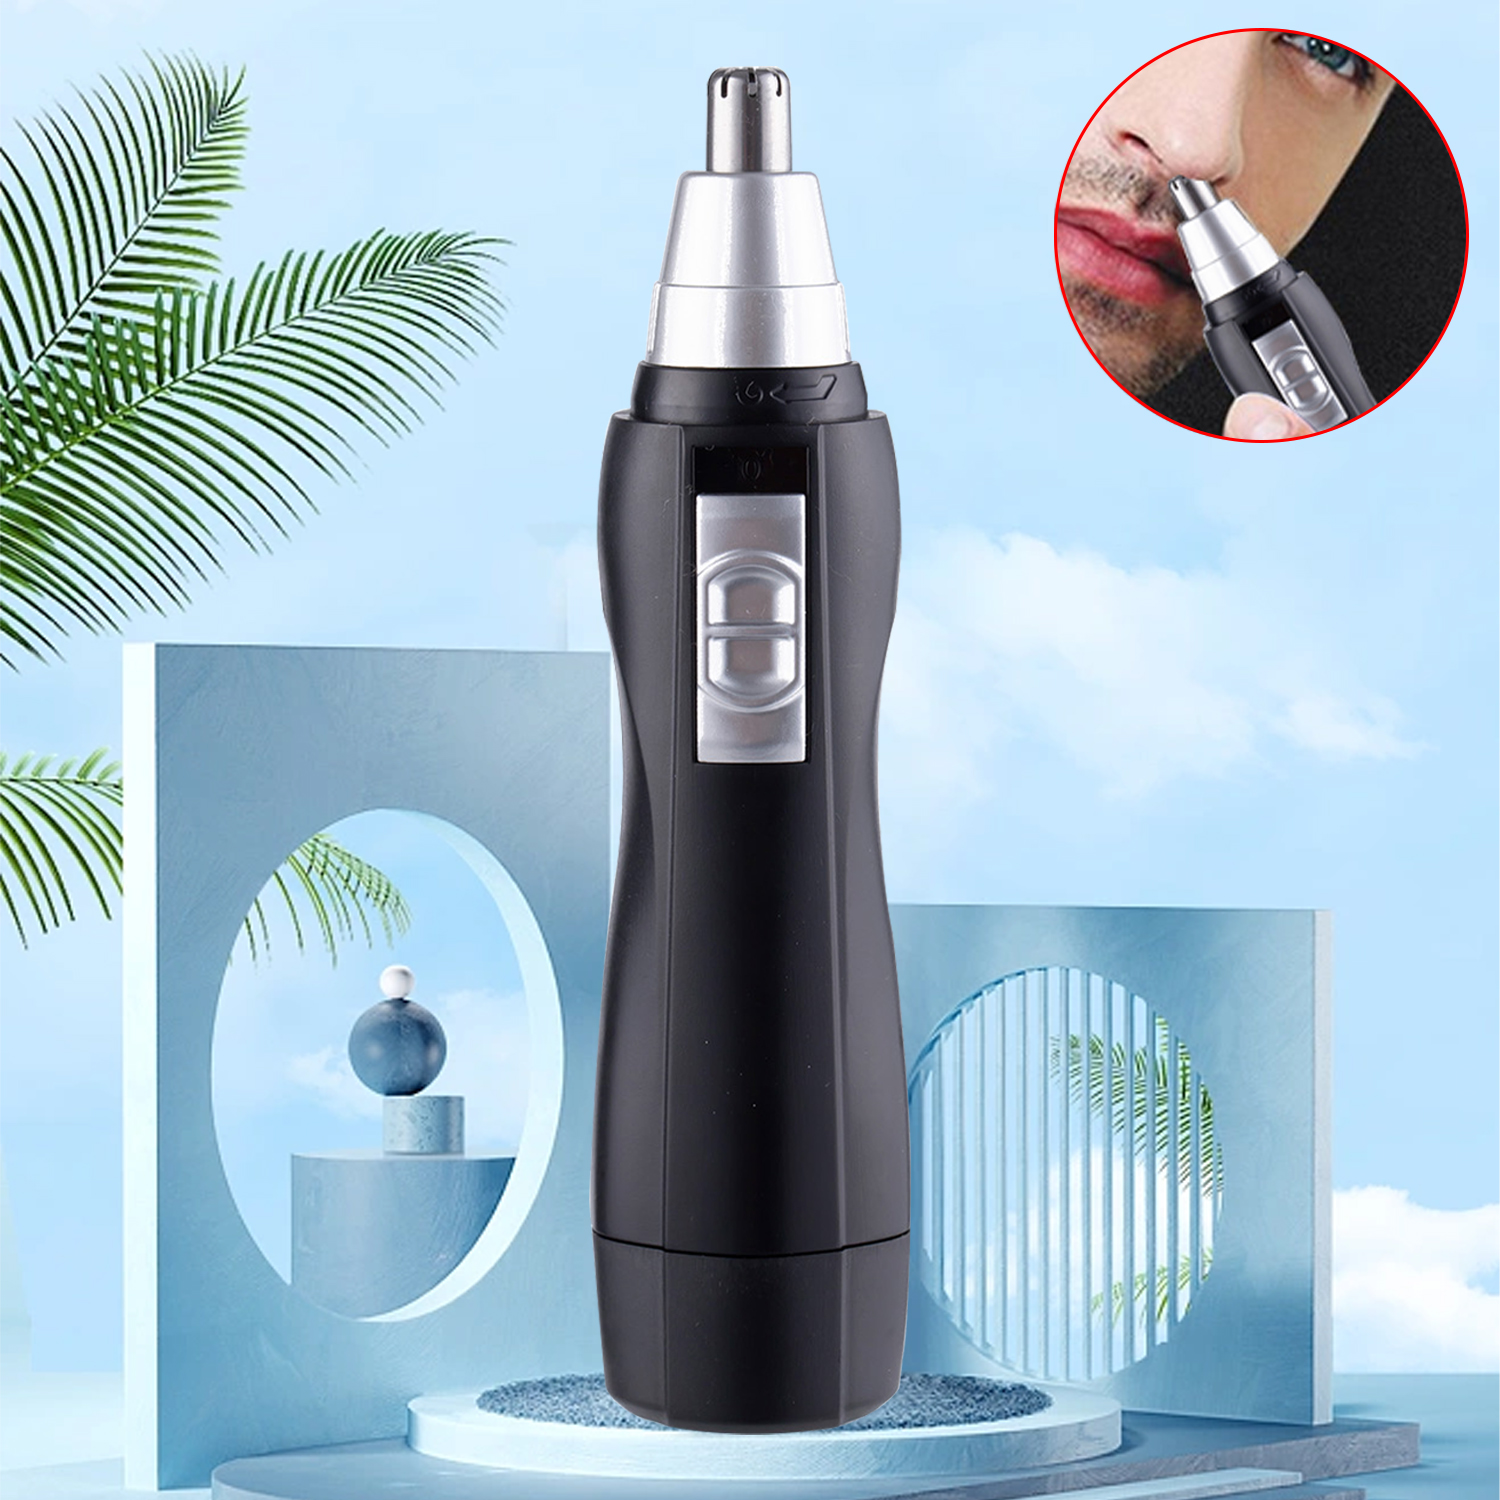 Portable Mini Nose Hair Removal Trimmer Shaver Remover Clipper Tool for Men Women Neat Clean Trimer Razor Removal